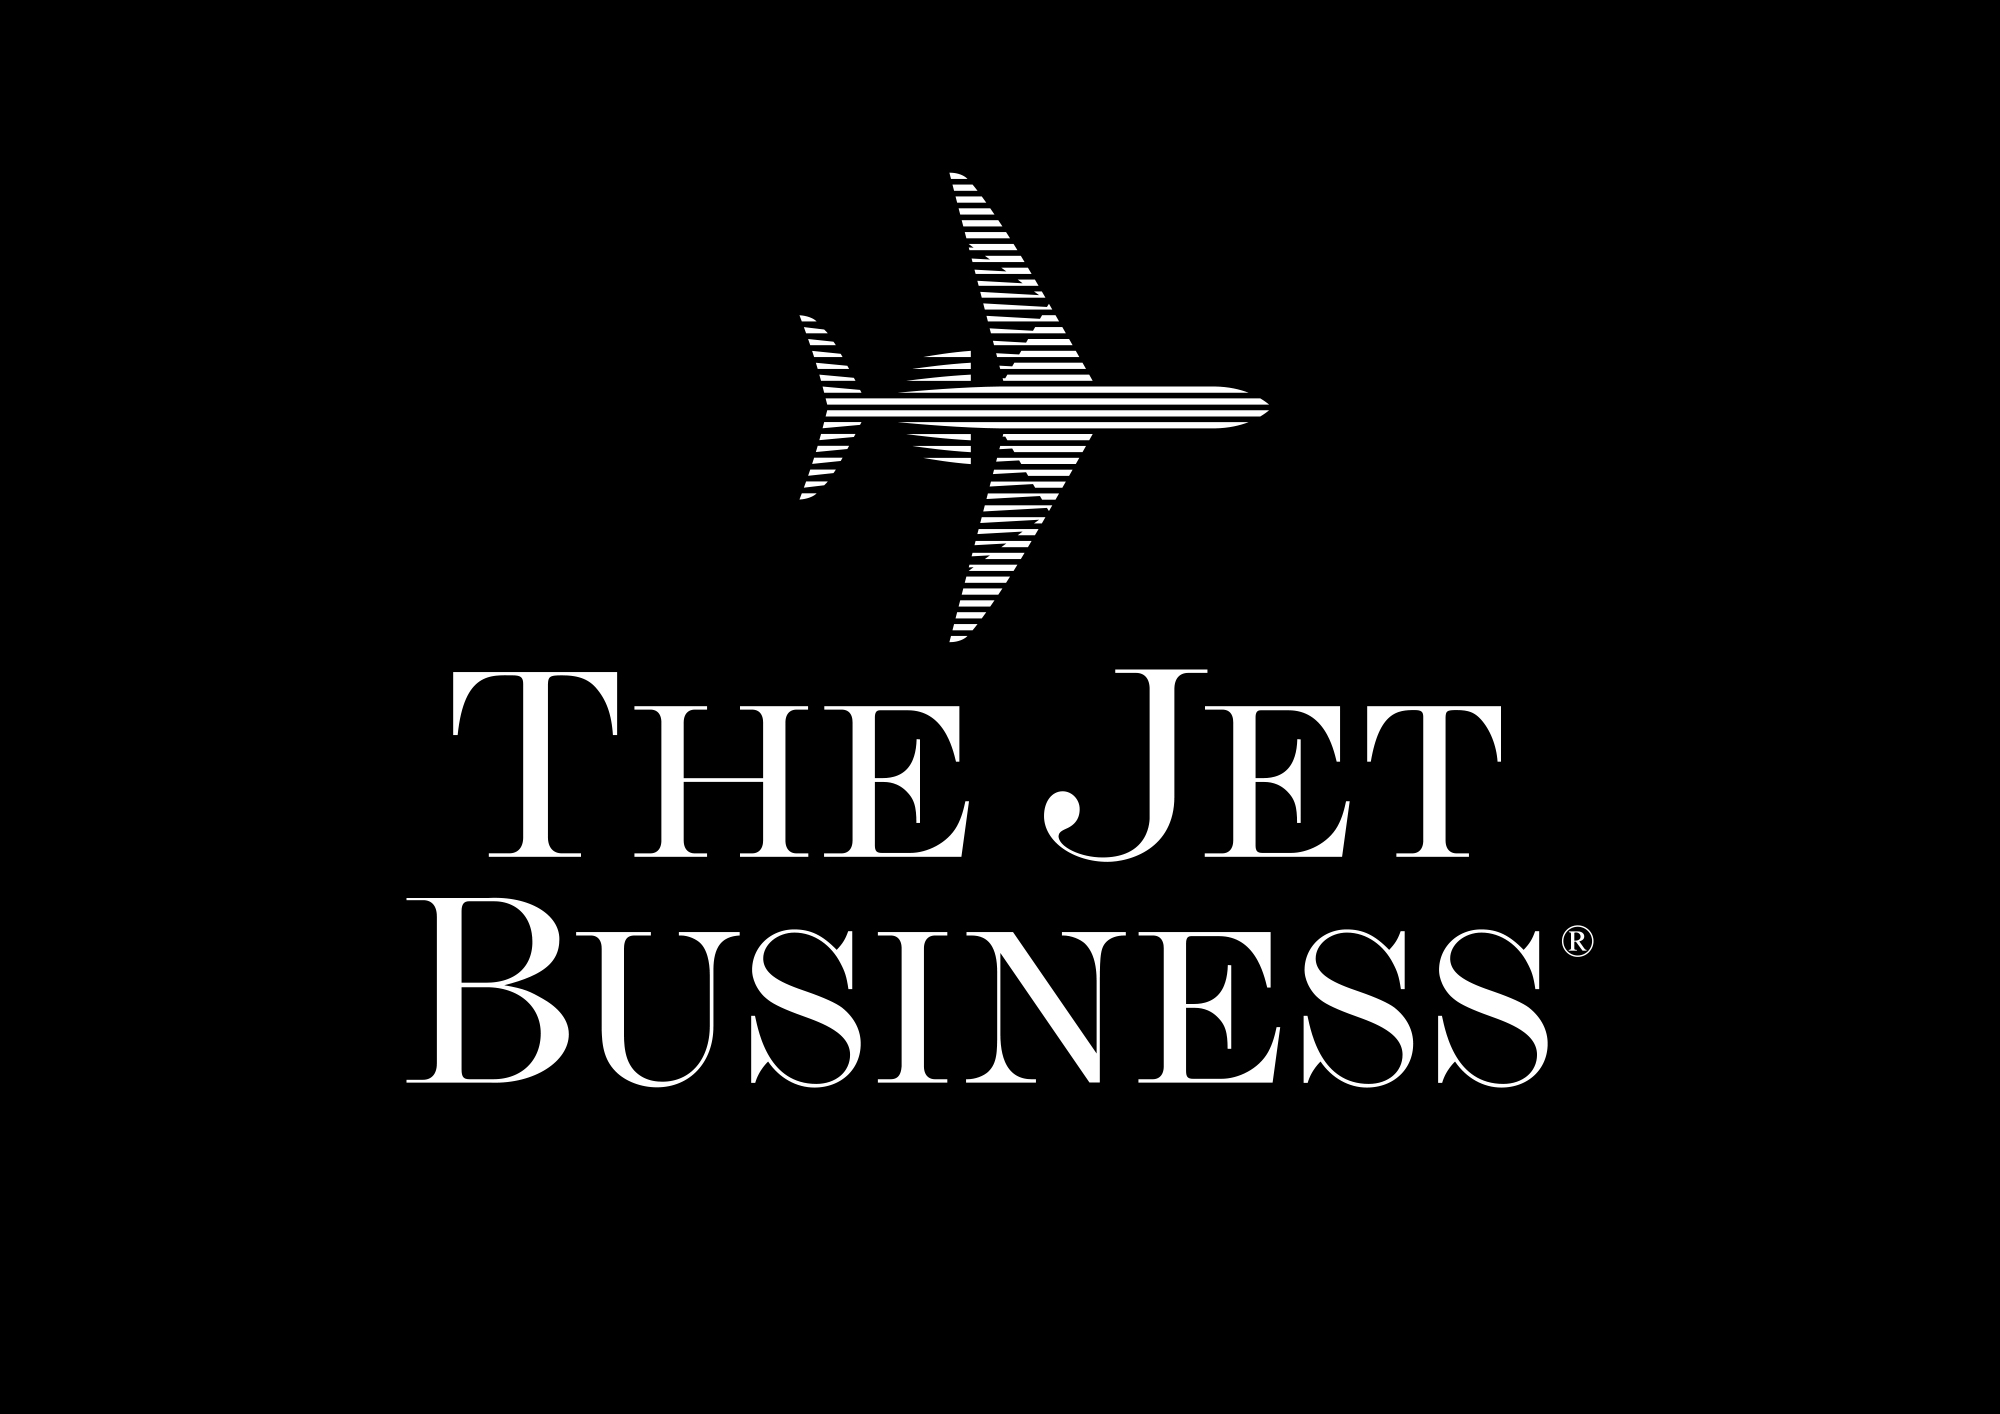 The Jet Business logo